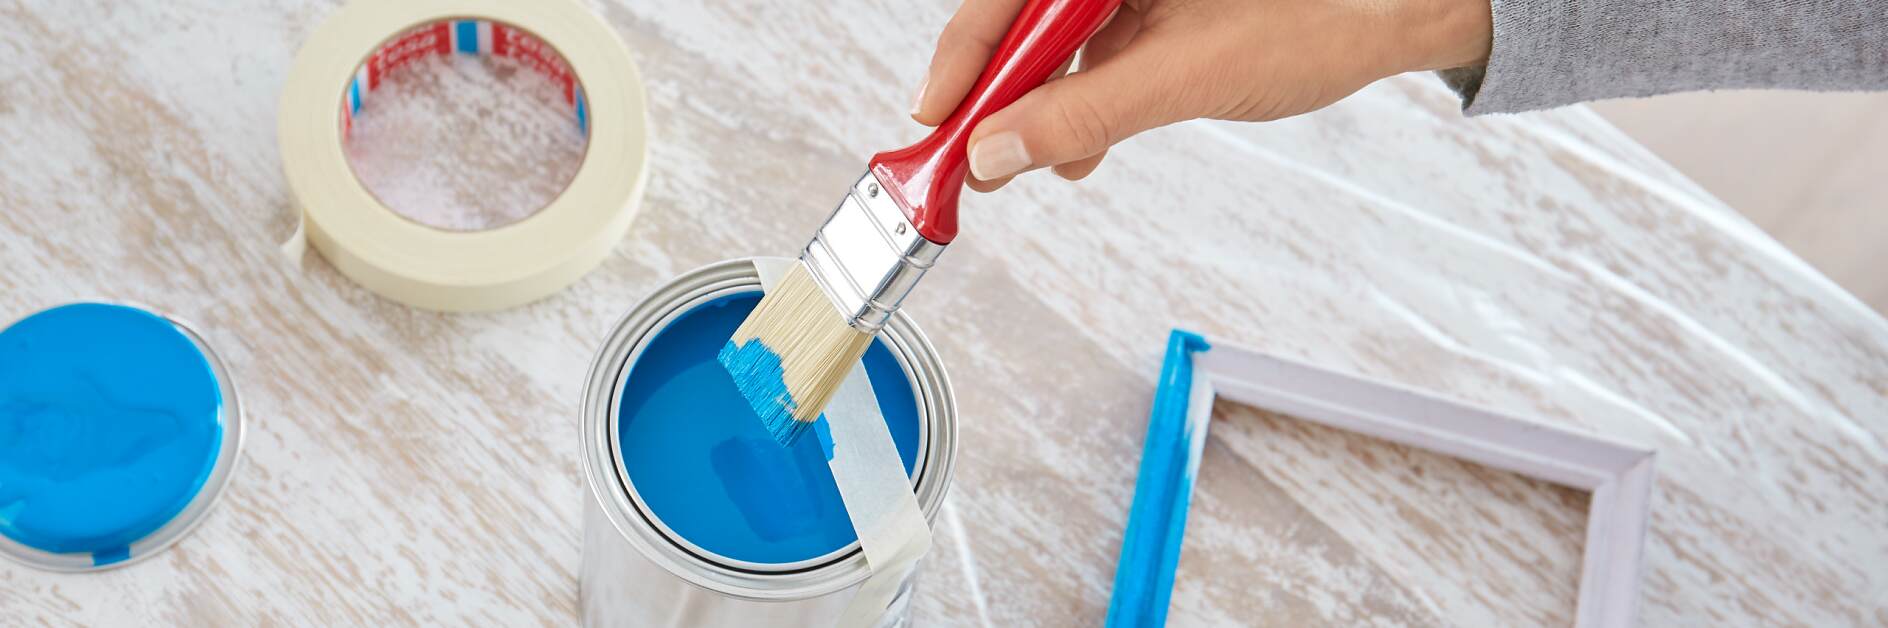 Easy Trick for DIY Painting Projects with Masking Tape